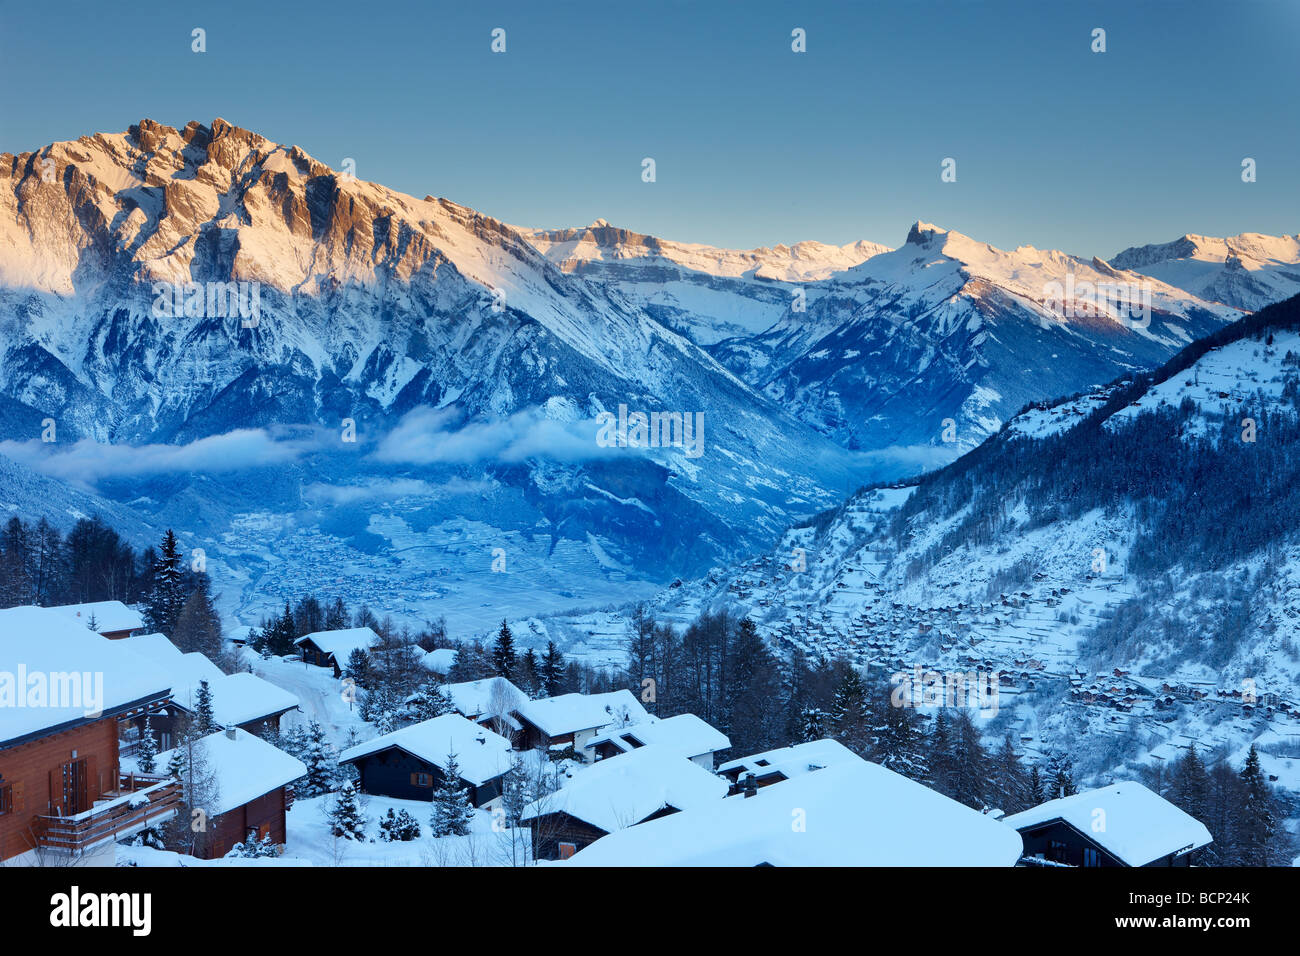 a fresh snowfall on the alpine village of La Tzoumas at dawn, with Iserables and Rhone Valley beyond, Valais Region, Switzerland Stock Photo